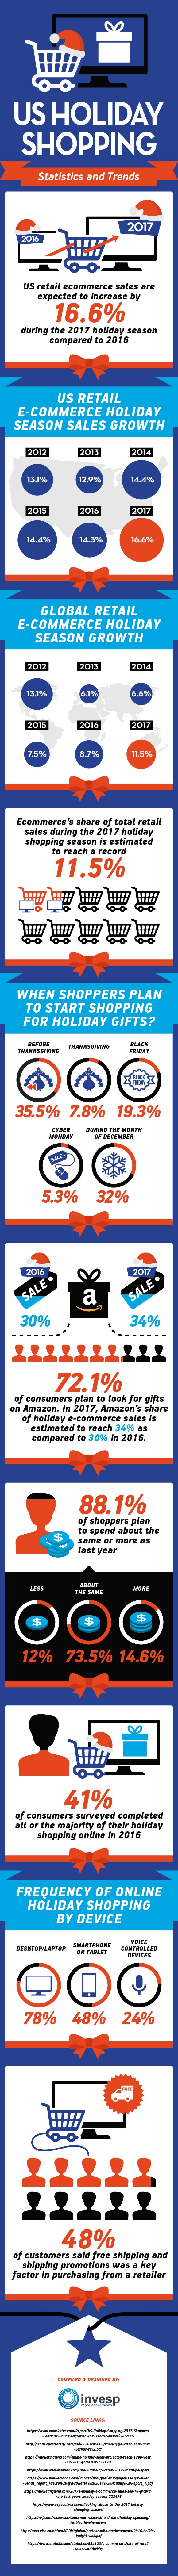 US Holiday Shopping Statistics and Trends